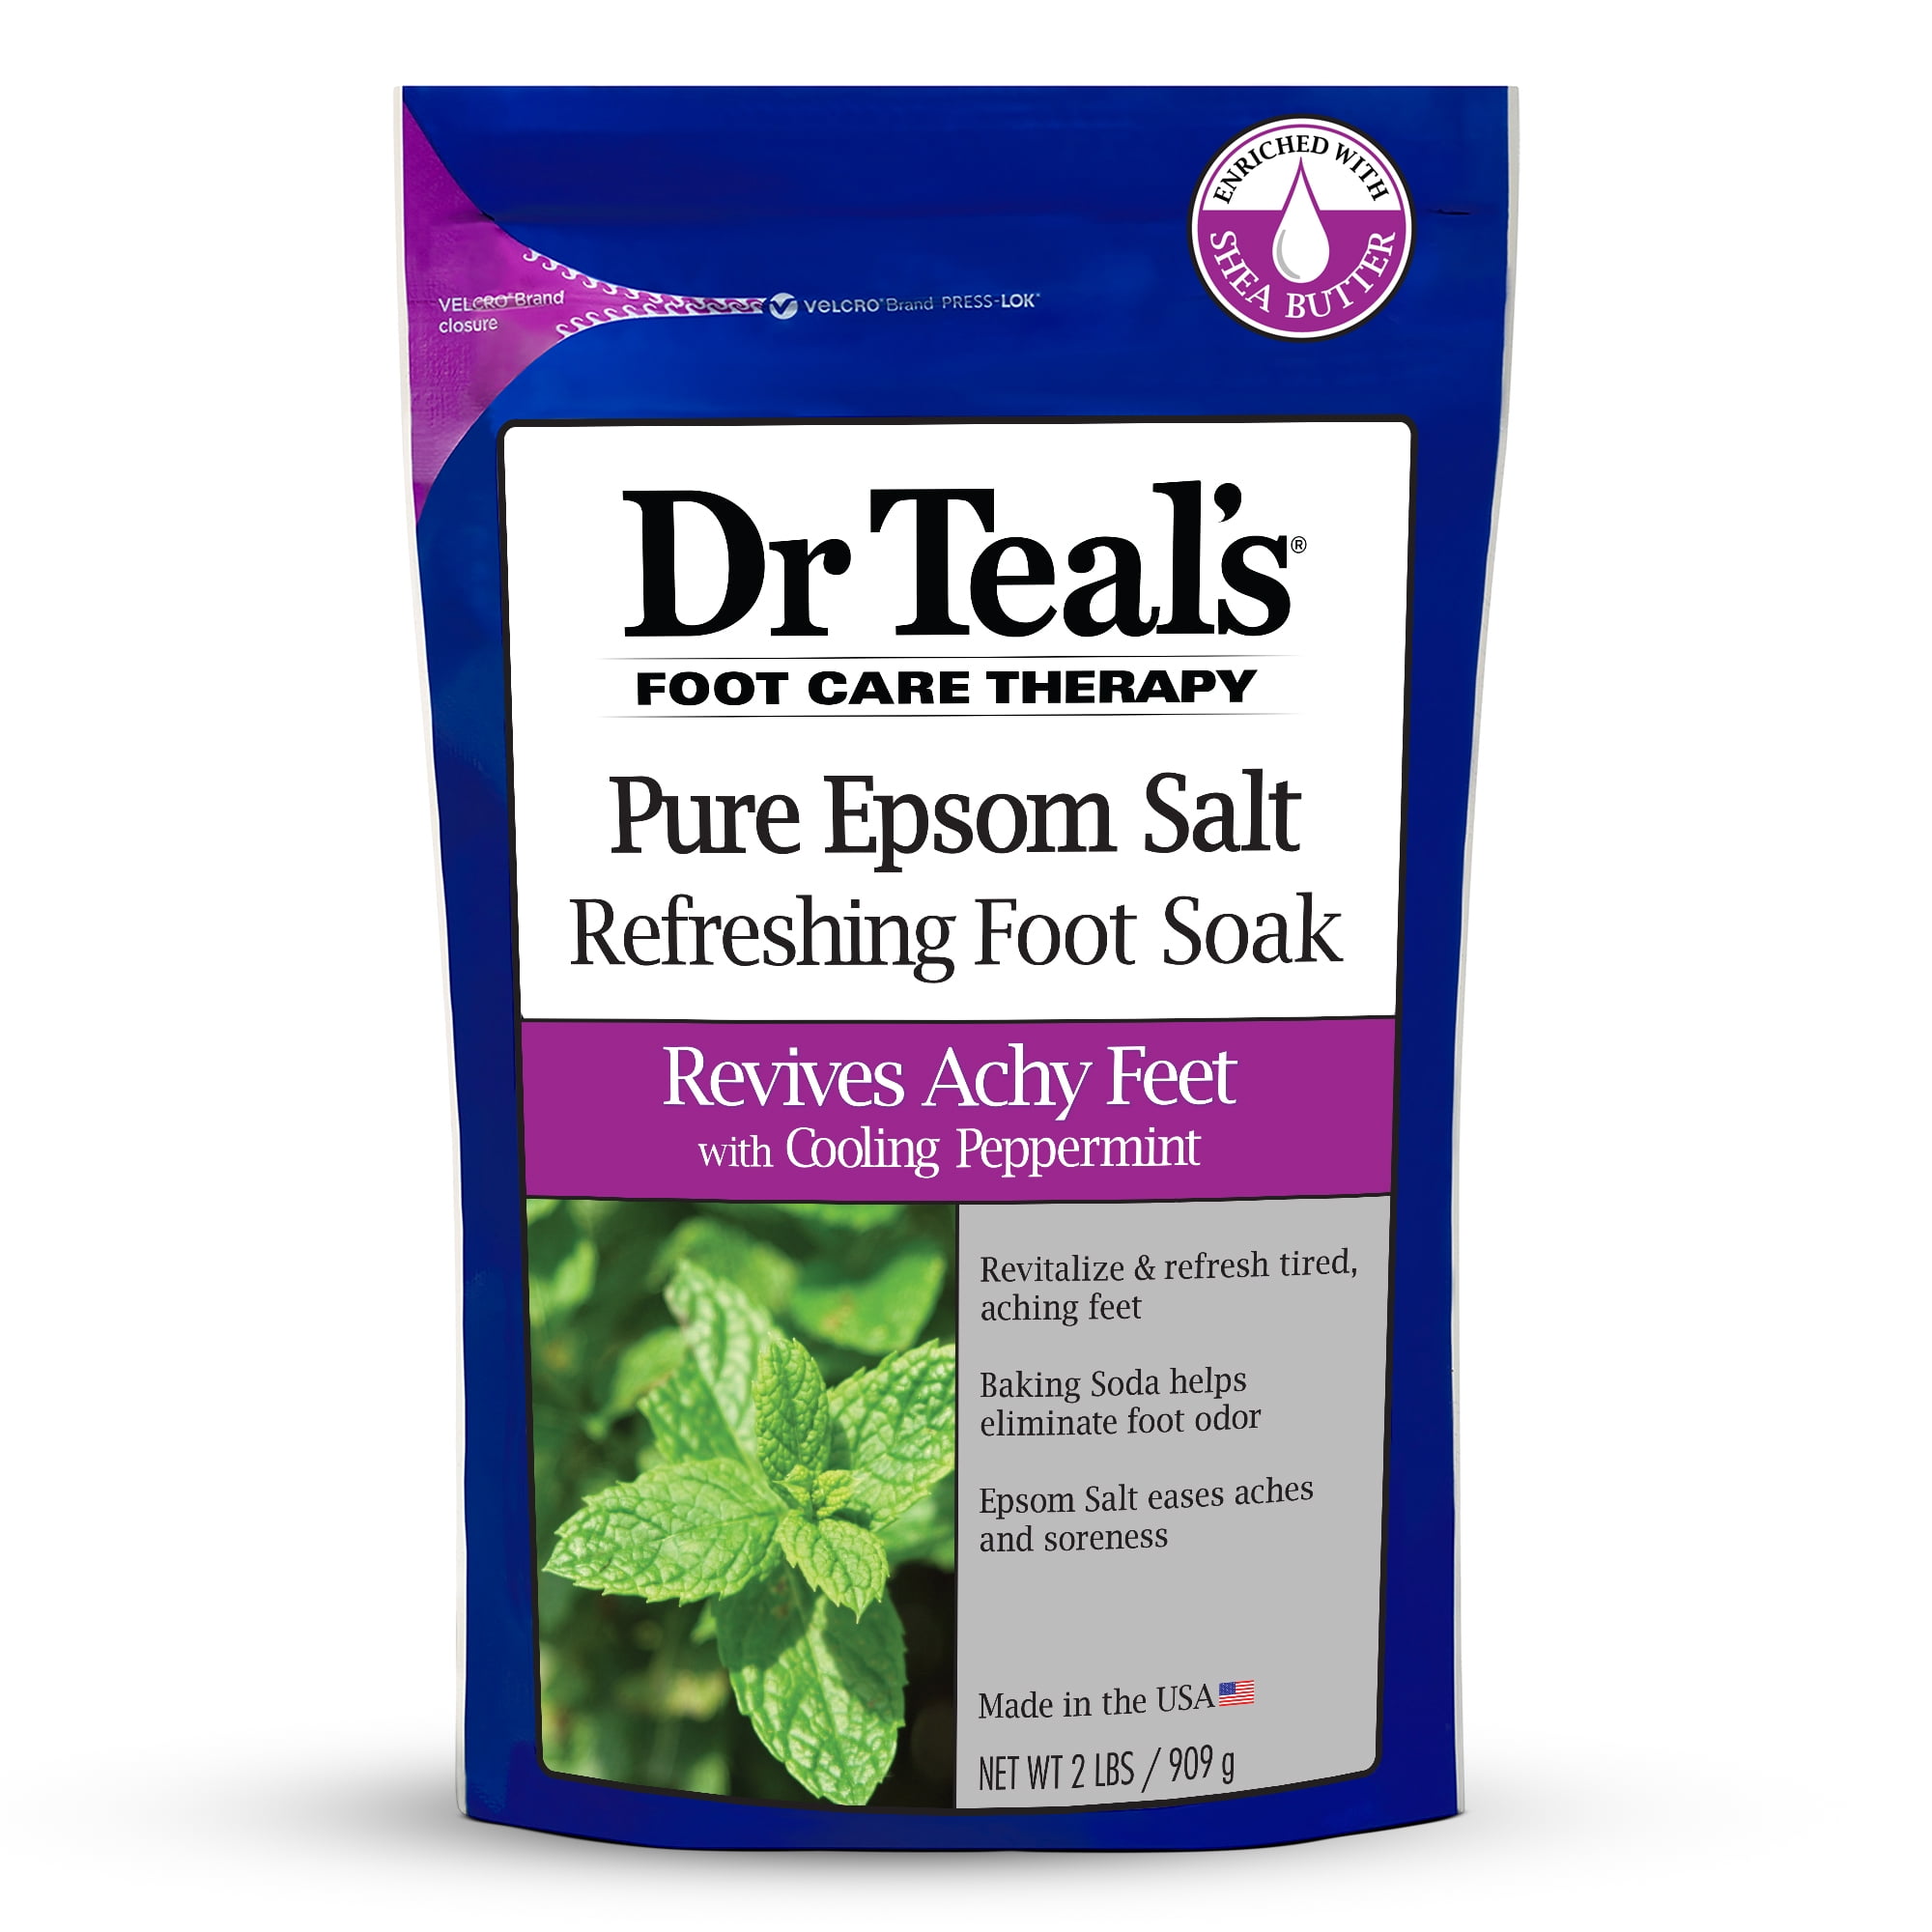 Dr Teal's Foot Care Therapy Pure Epsom Salt Refreshing Foot Soak with Cooling Peppermint, 2 lbs